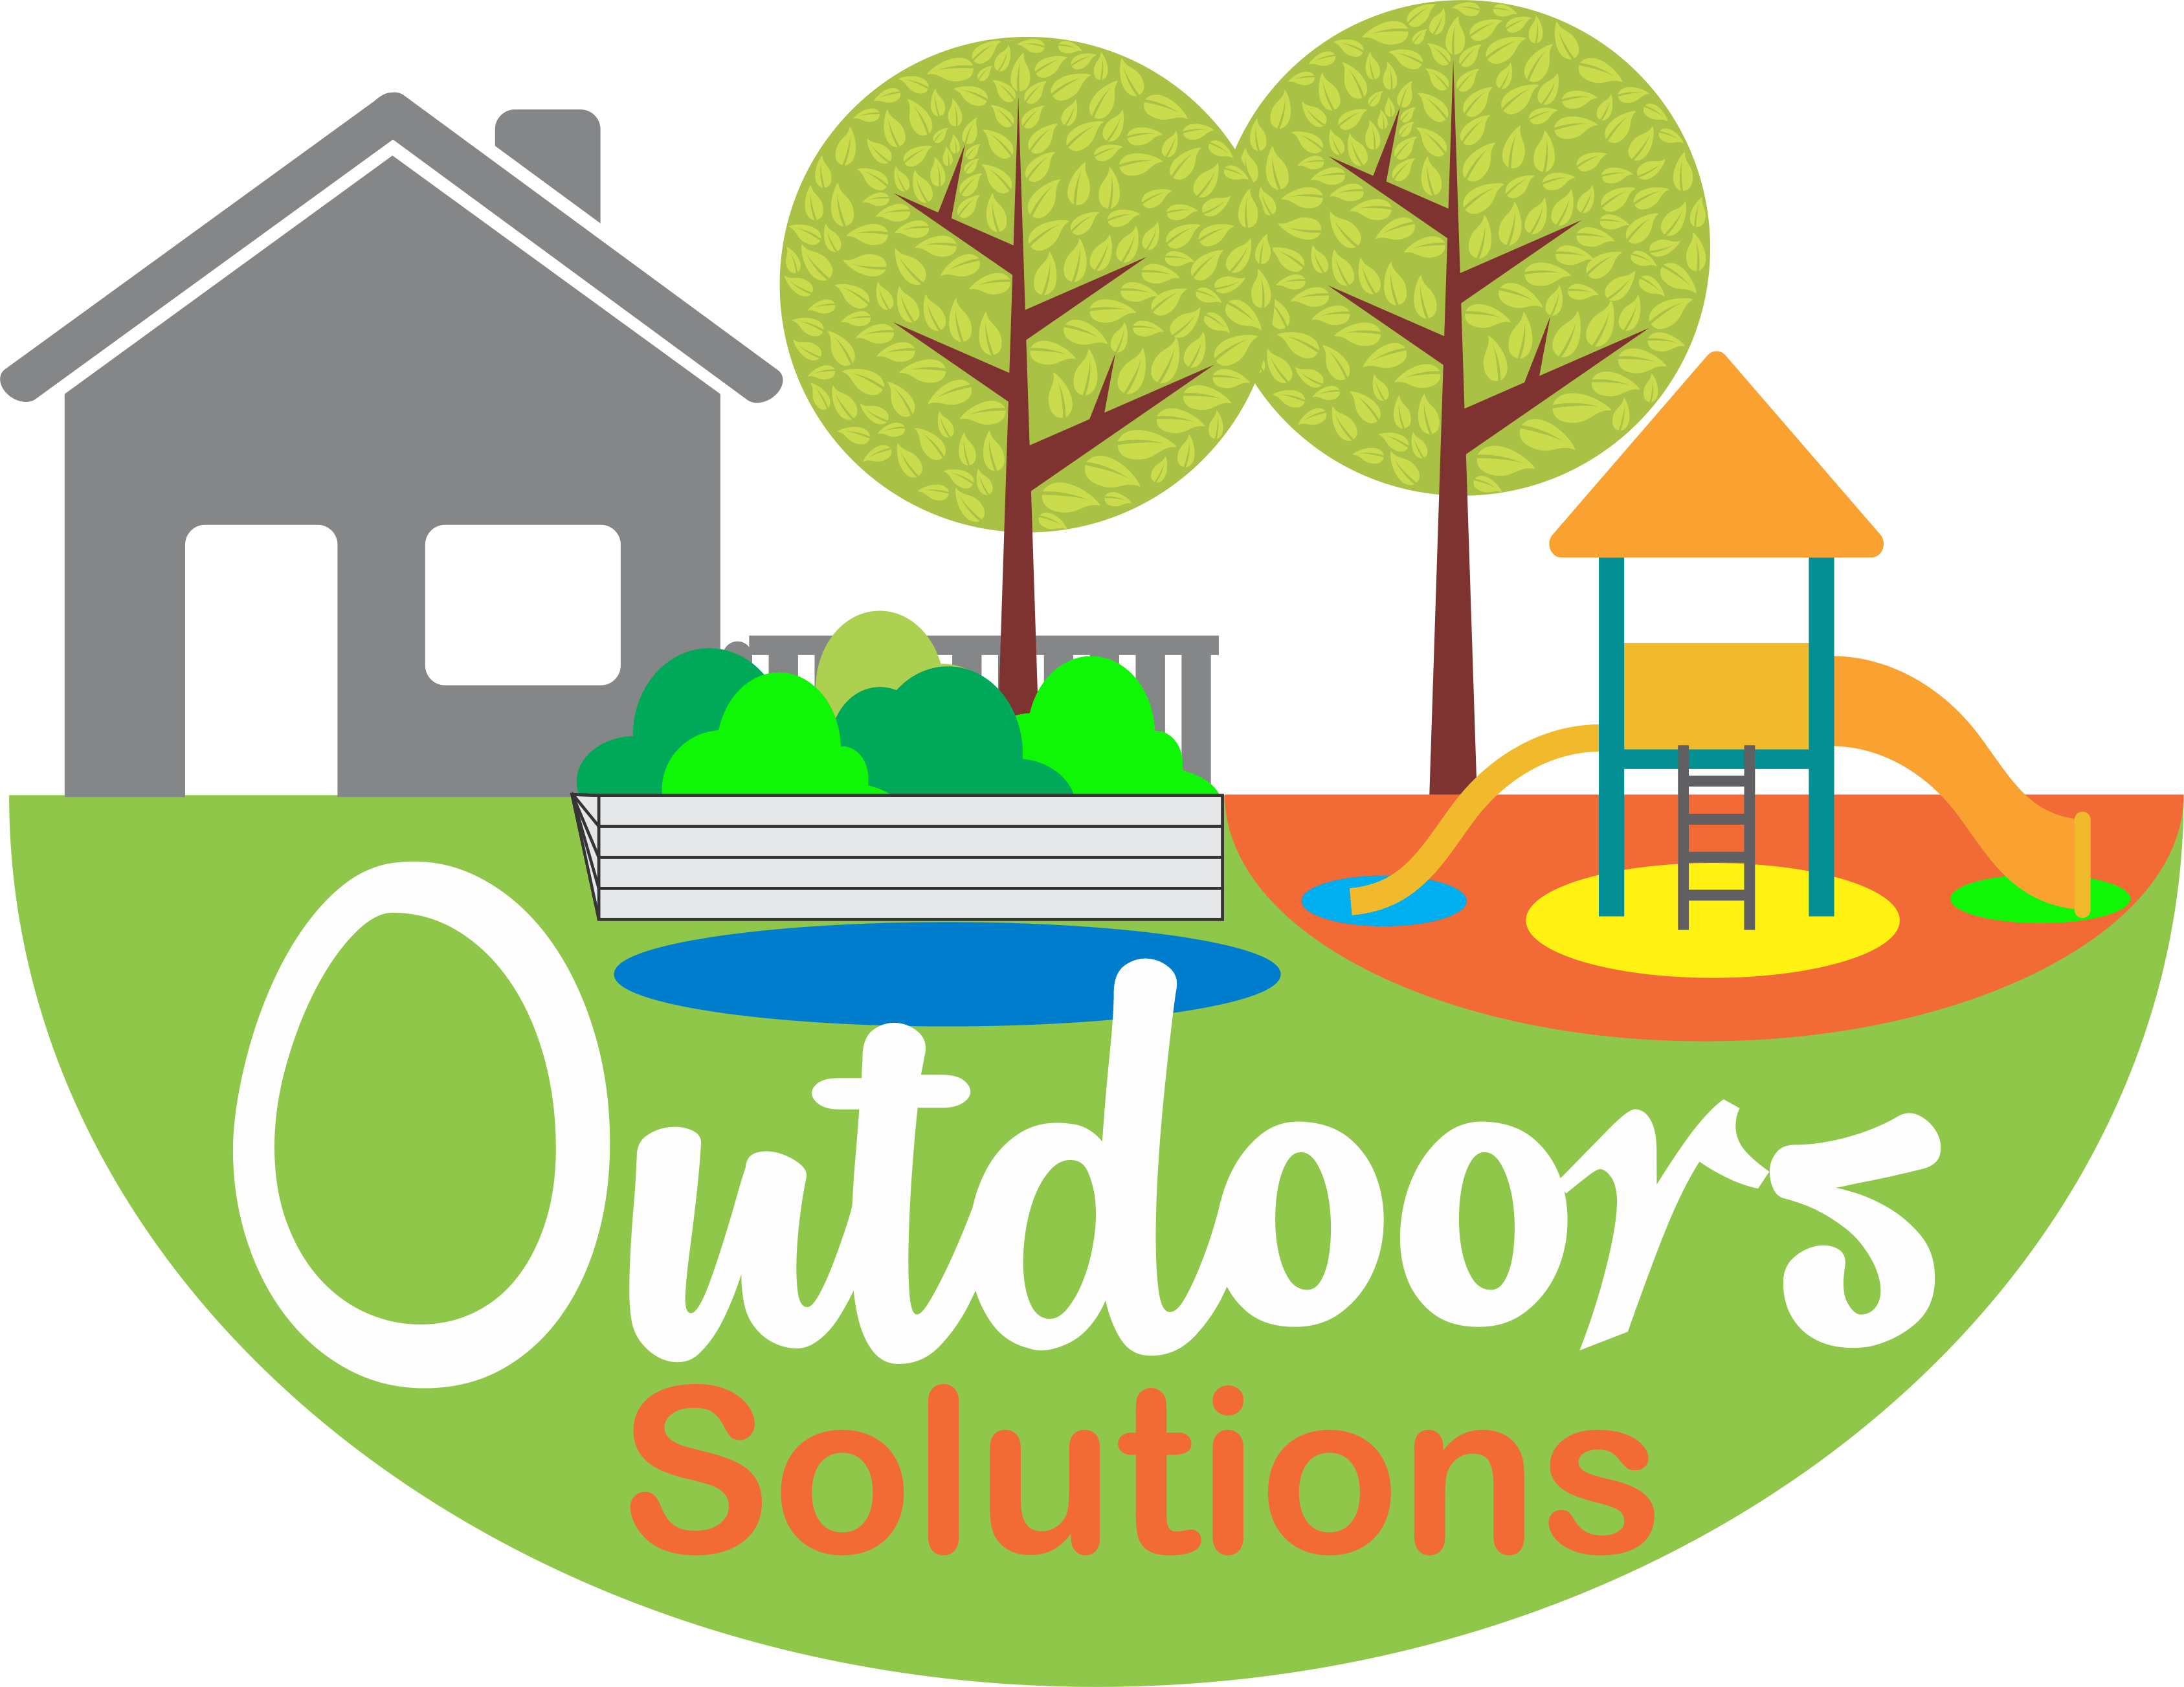 outdoors clipart turf